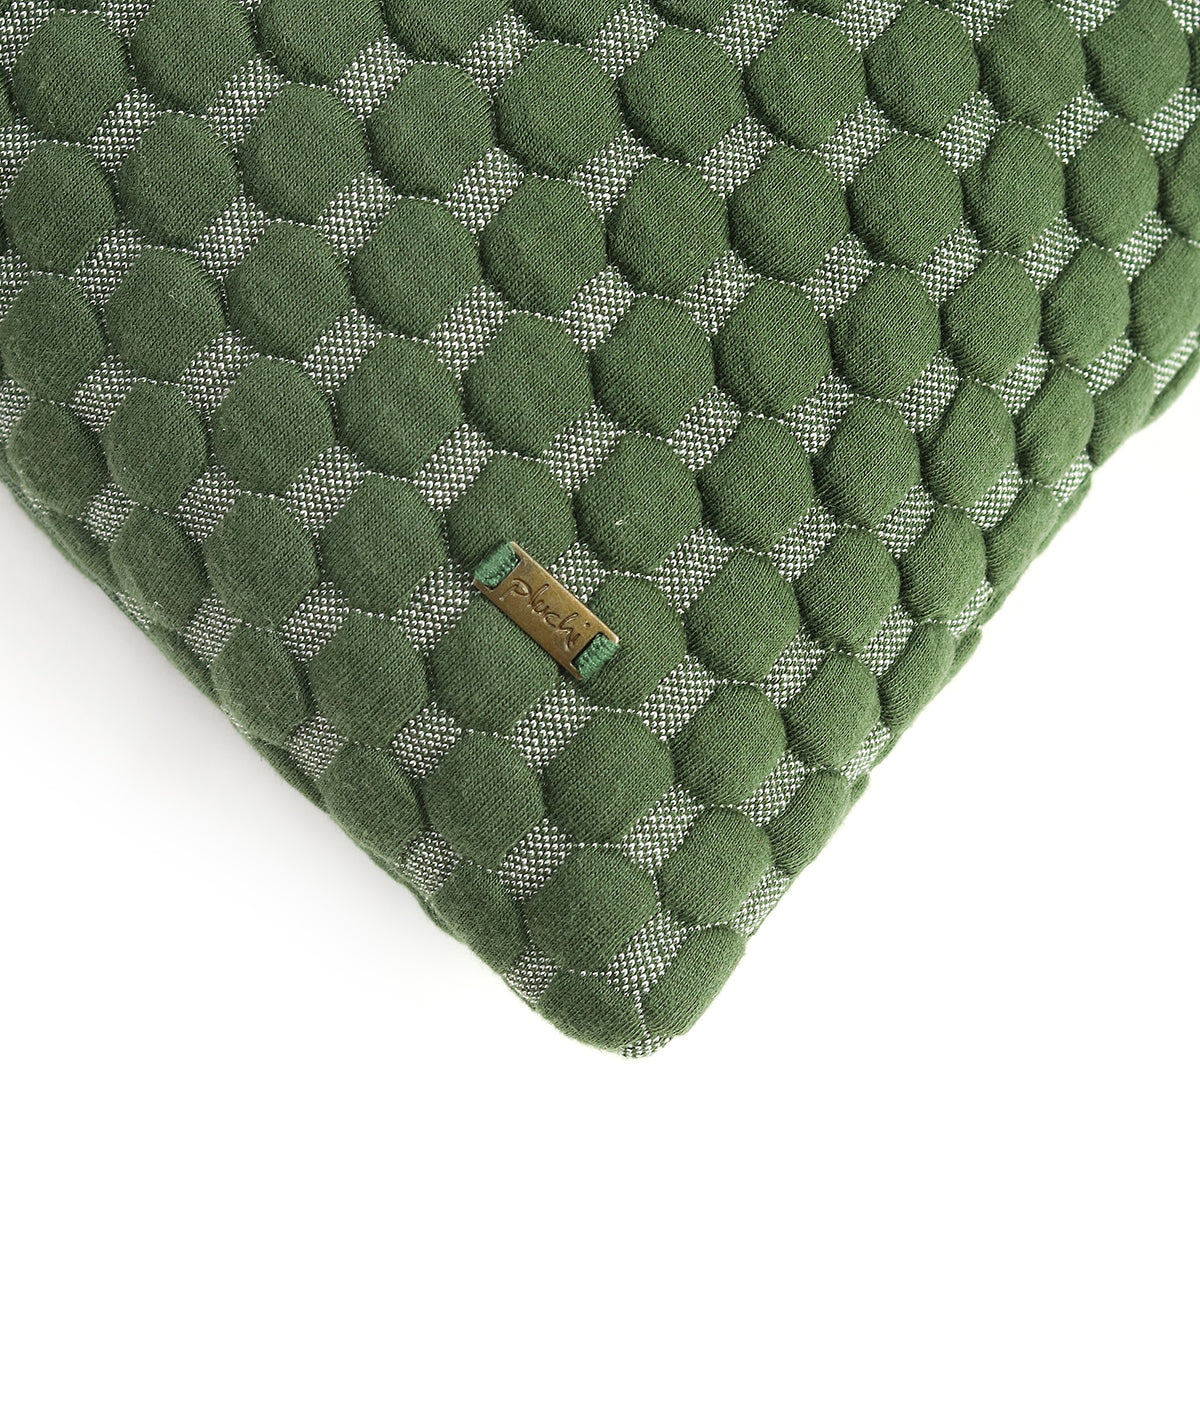 Bubbles Green & Natural Quilted Cotton Knitted Decorative 18 X 18 Inches Cushion Cover